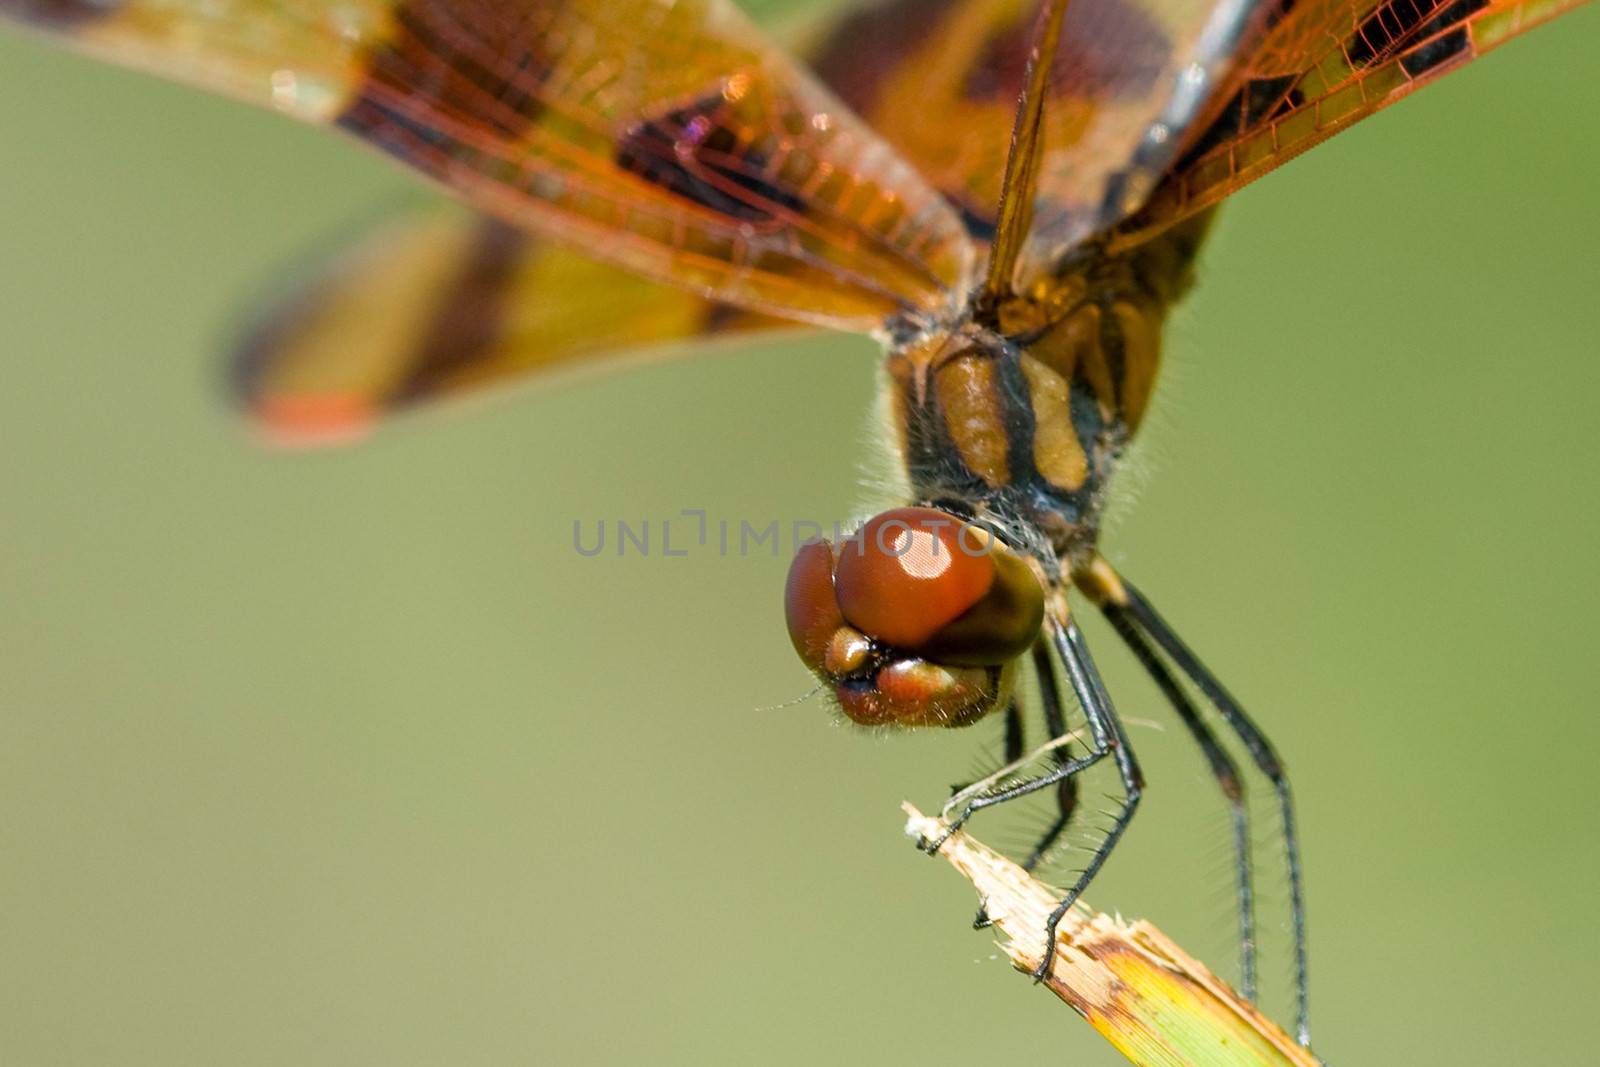 Close up of a brown dragonfly with spotted swings standing on a broken twig or branch.